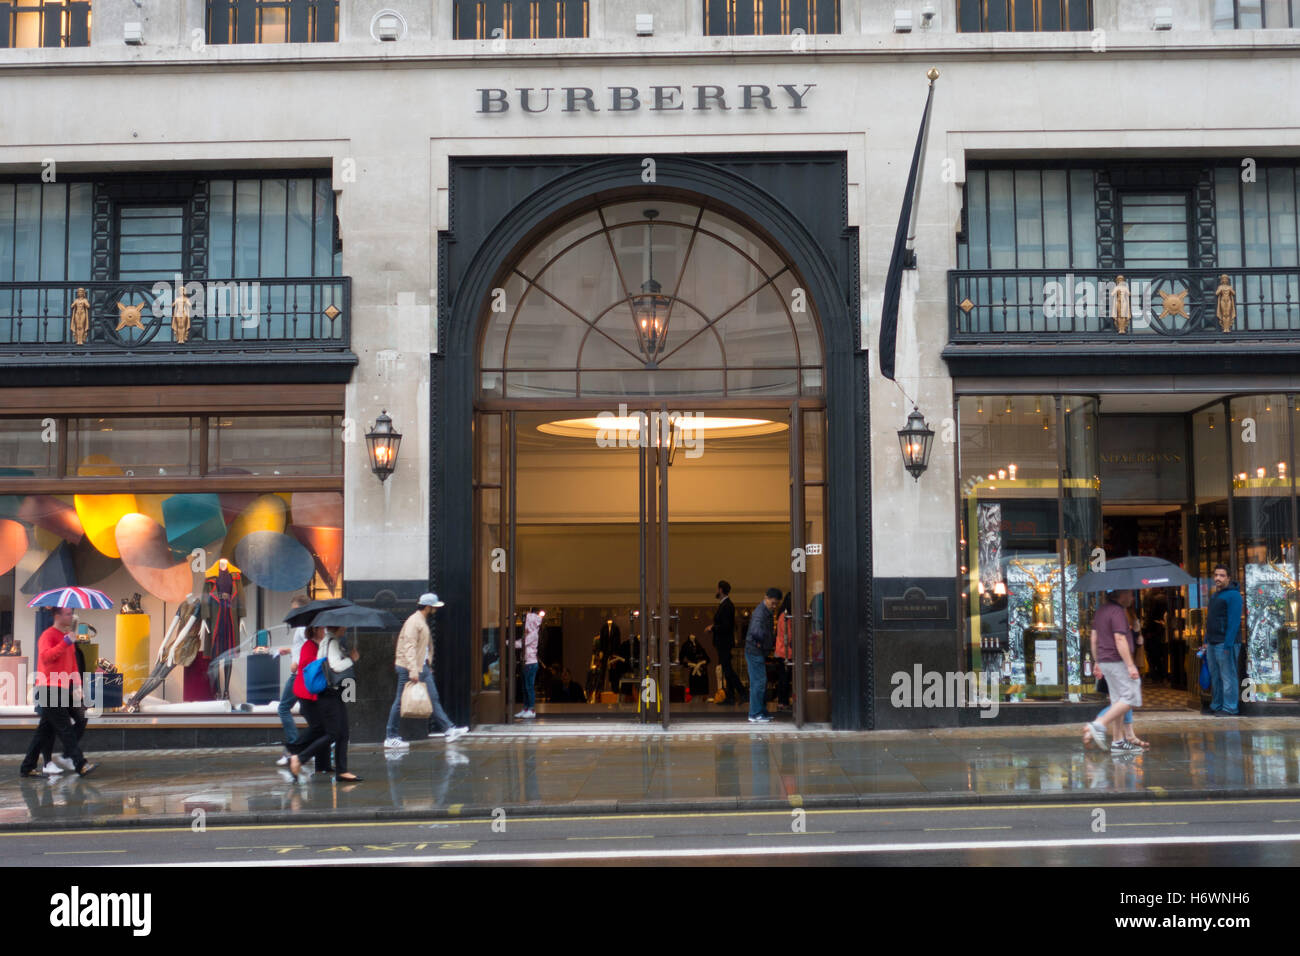 Burberry Shop at Regent Street in London Stock Photo - Alamy